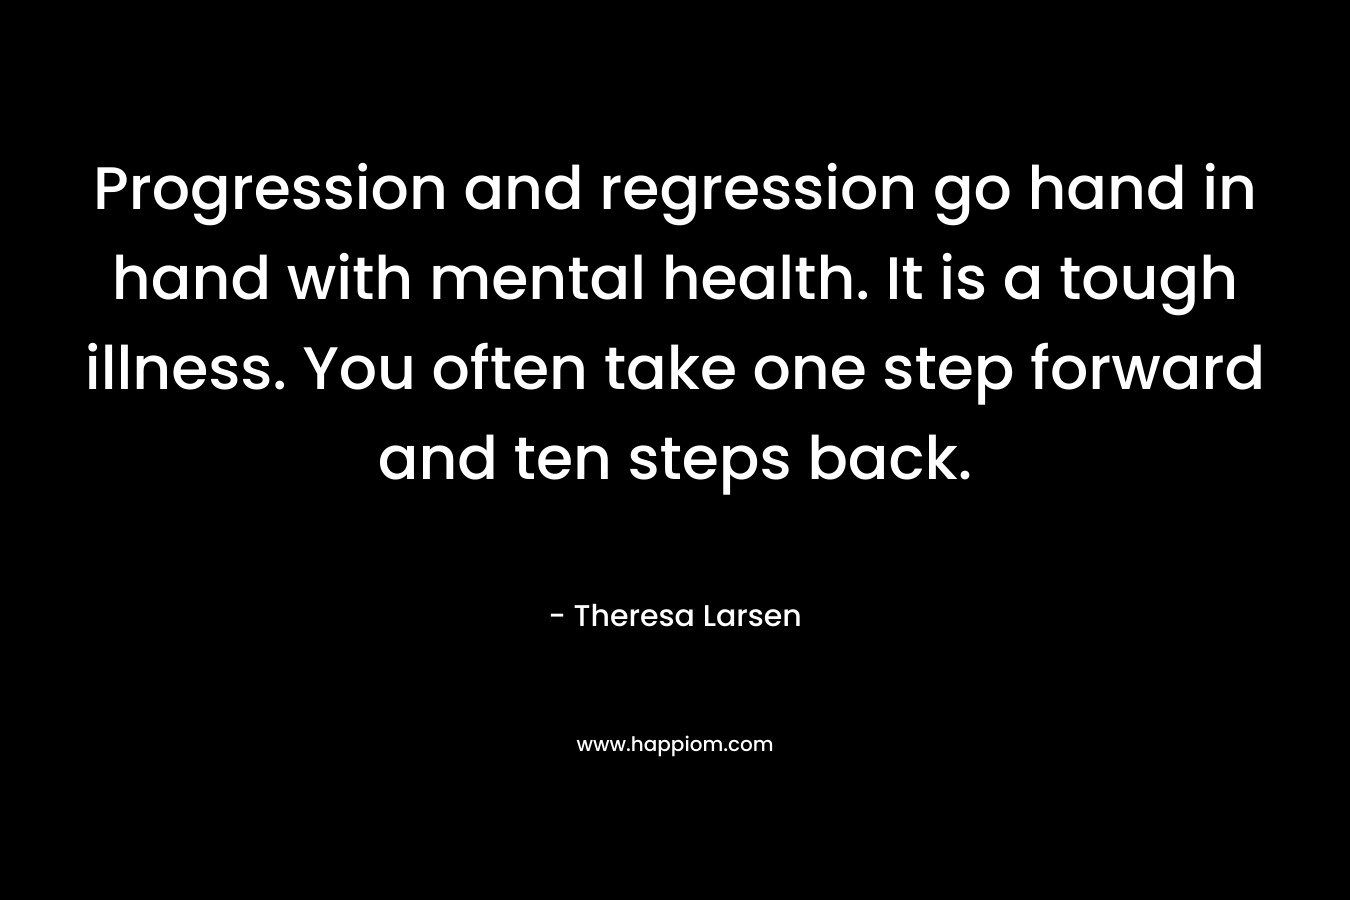 Progression and regression go hand in hand with mental health. It is a tough illness. You often take one step forward and ten steps back. – Theresa Larsen